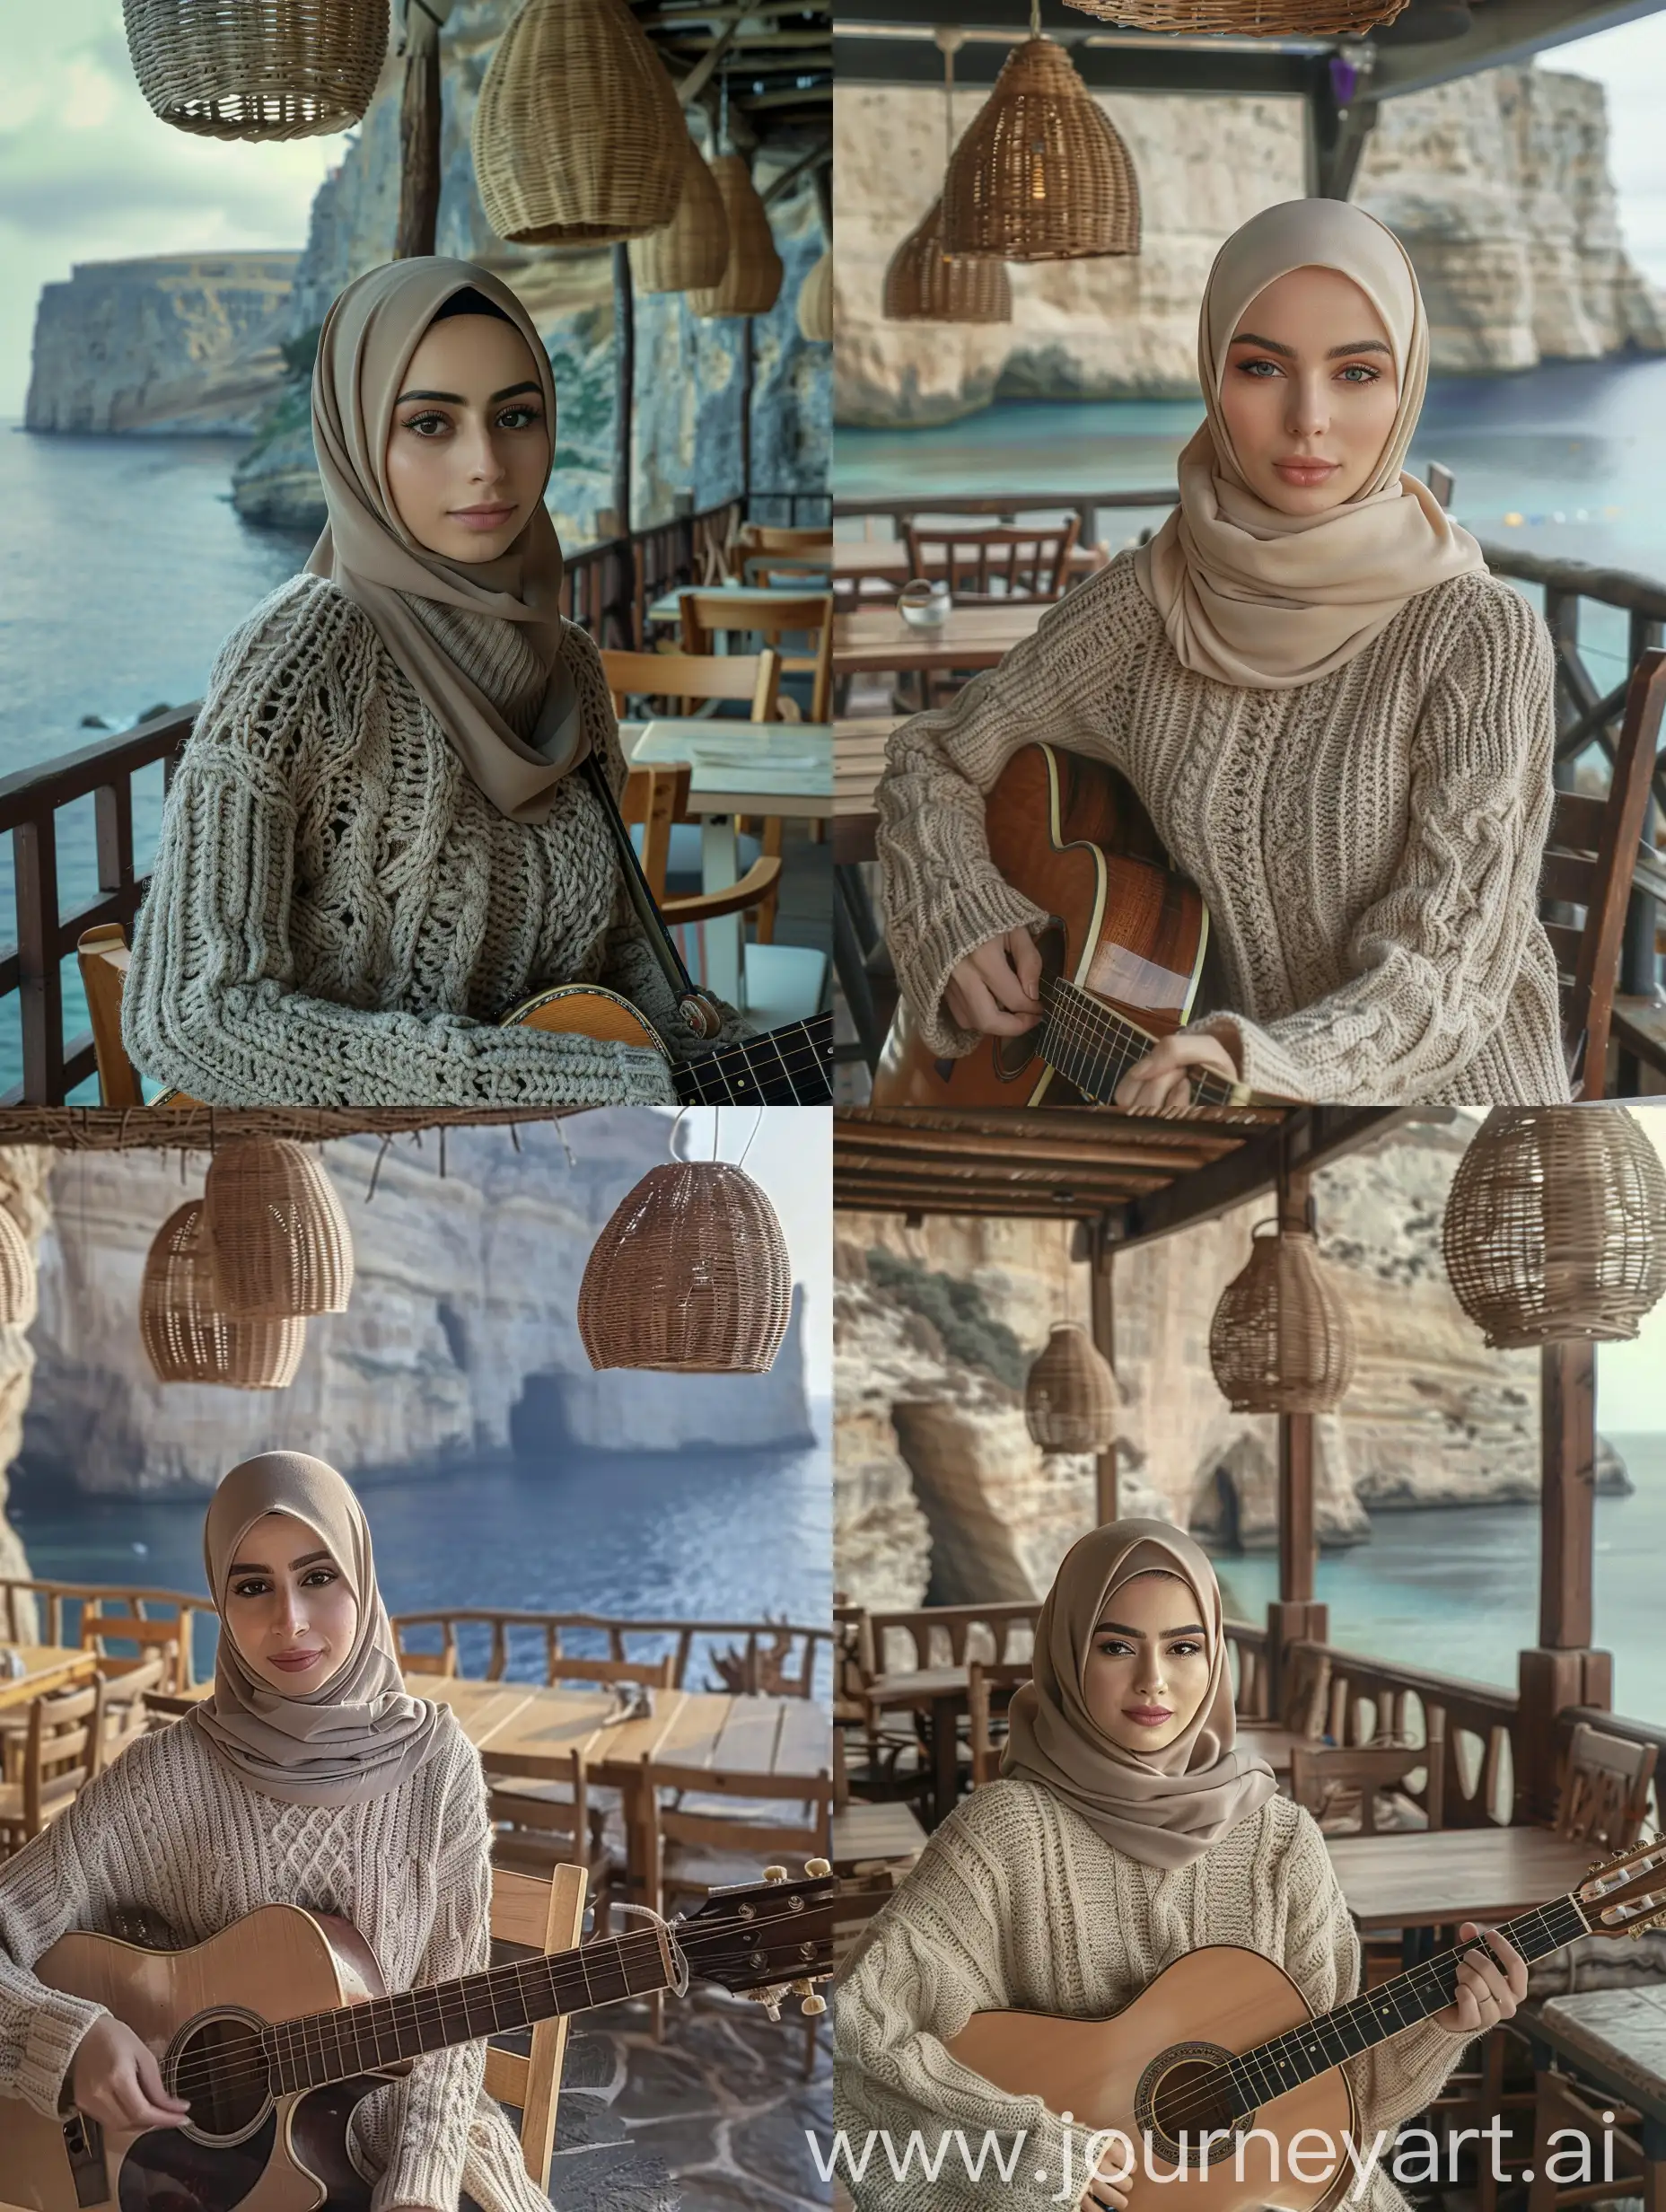 HijabWearing-Woman-Playing-Guitar-in-Scenic-Caf-Overlooking-Cliffs-by-the-Sea